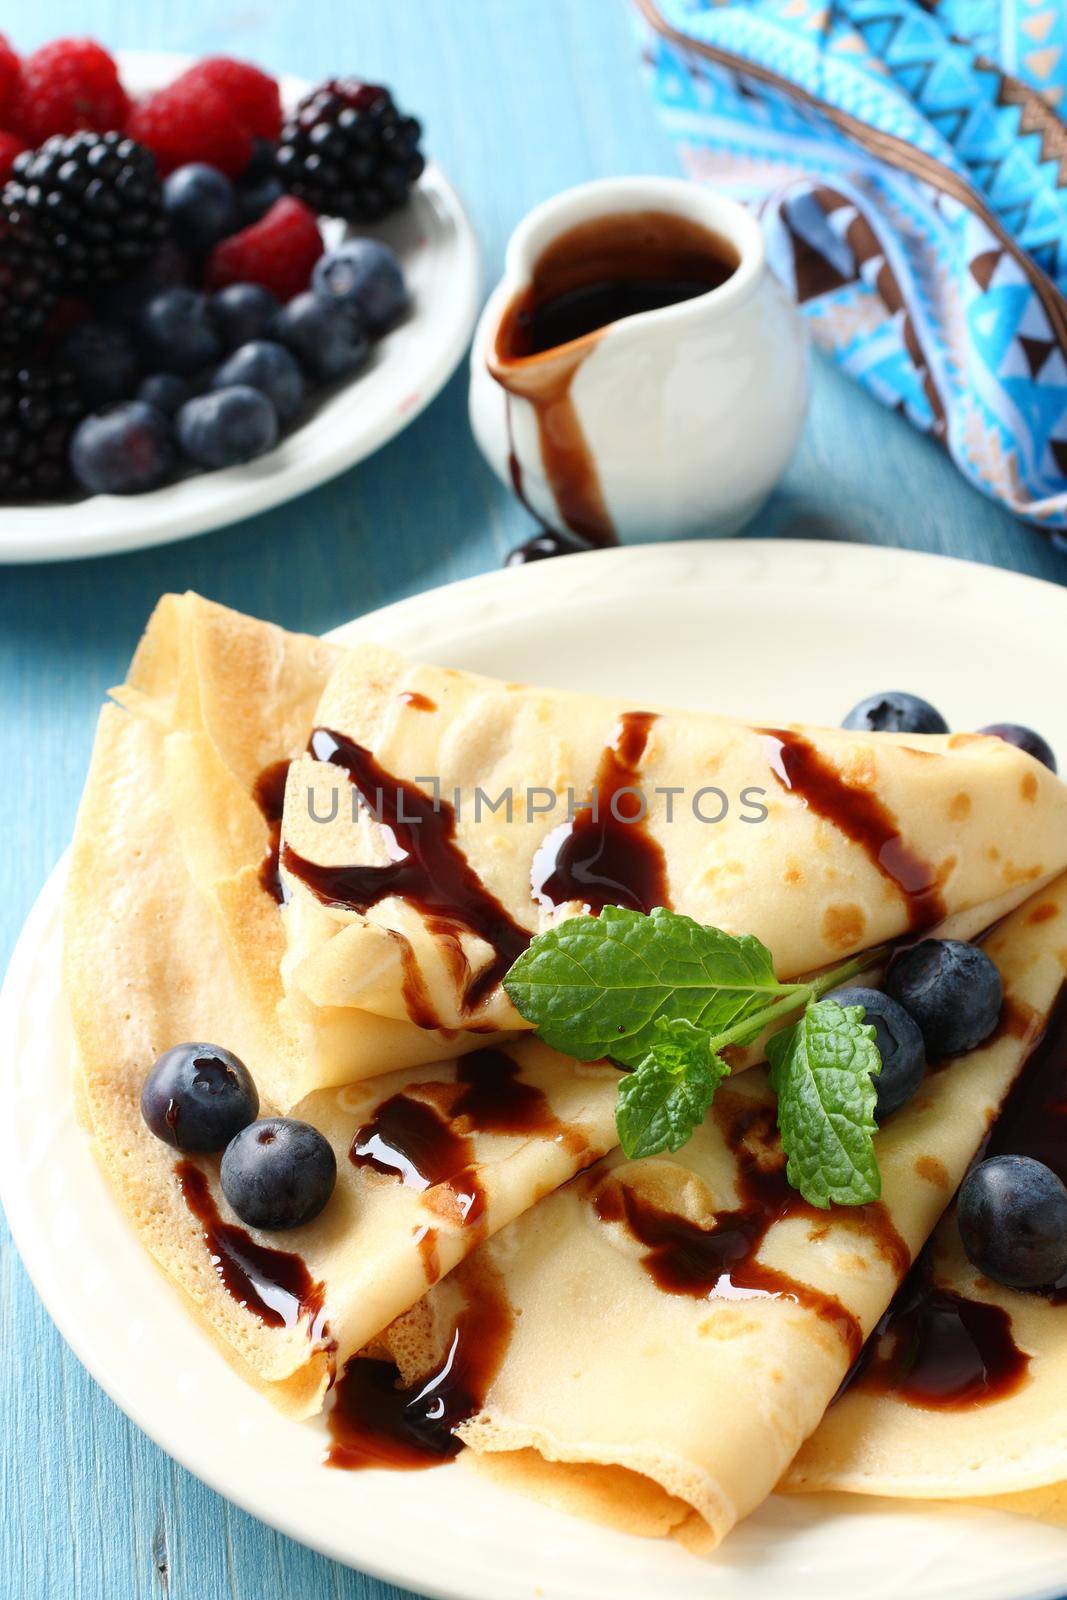 Homemade crepes with blueberries, chocolate sauce and mint